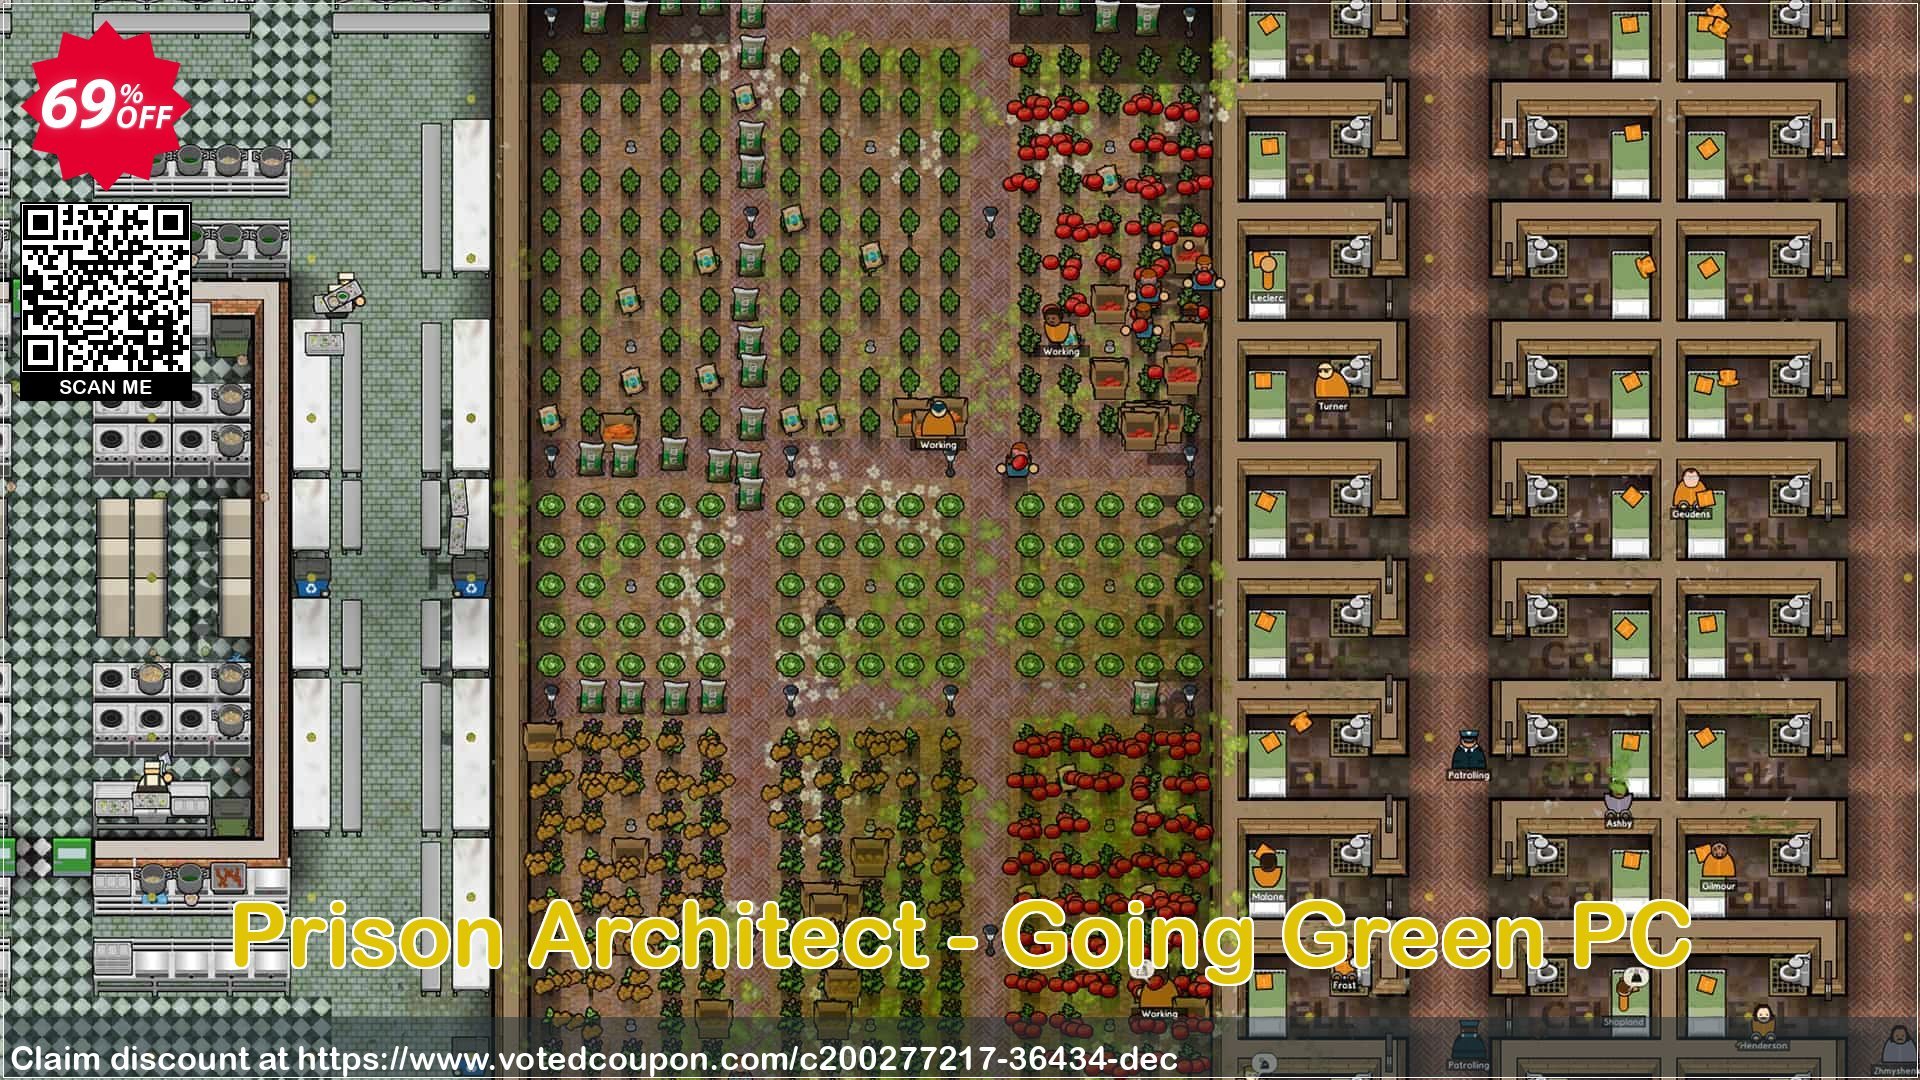 Prison Architect - Going Green PC Coupon Code May 2024, 69% OFF - VotedCoupon